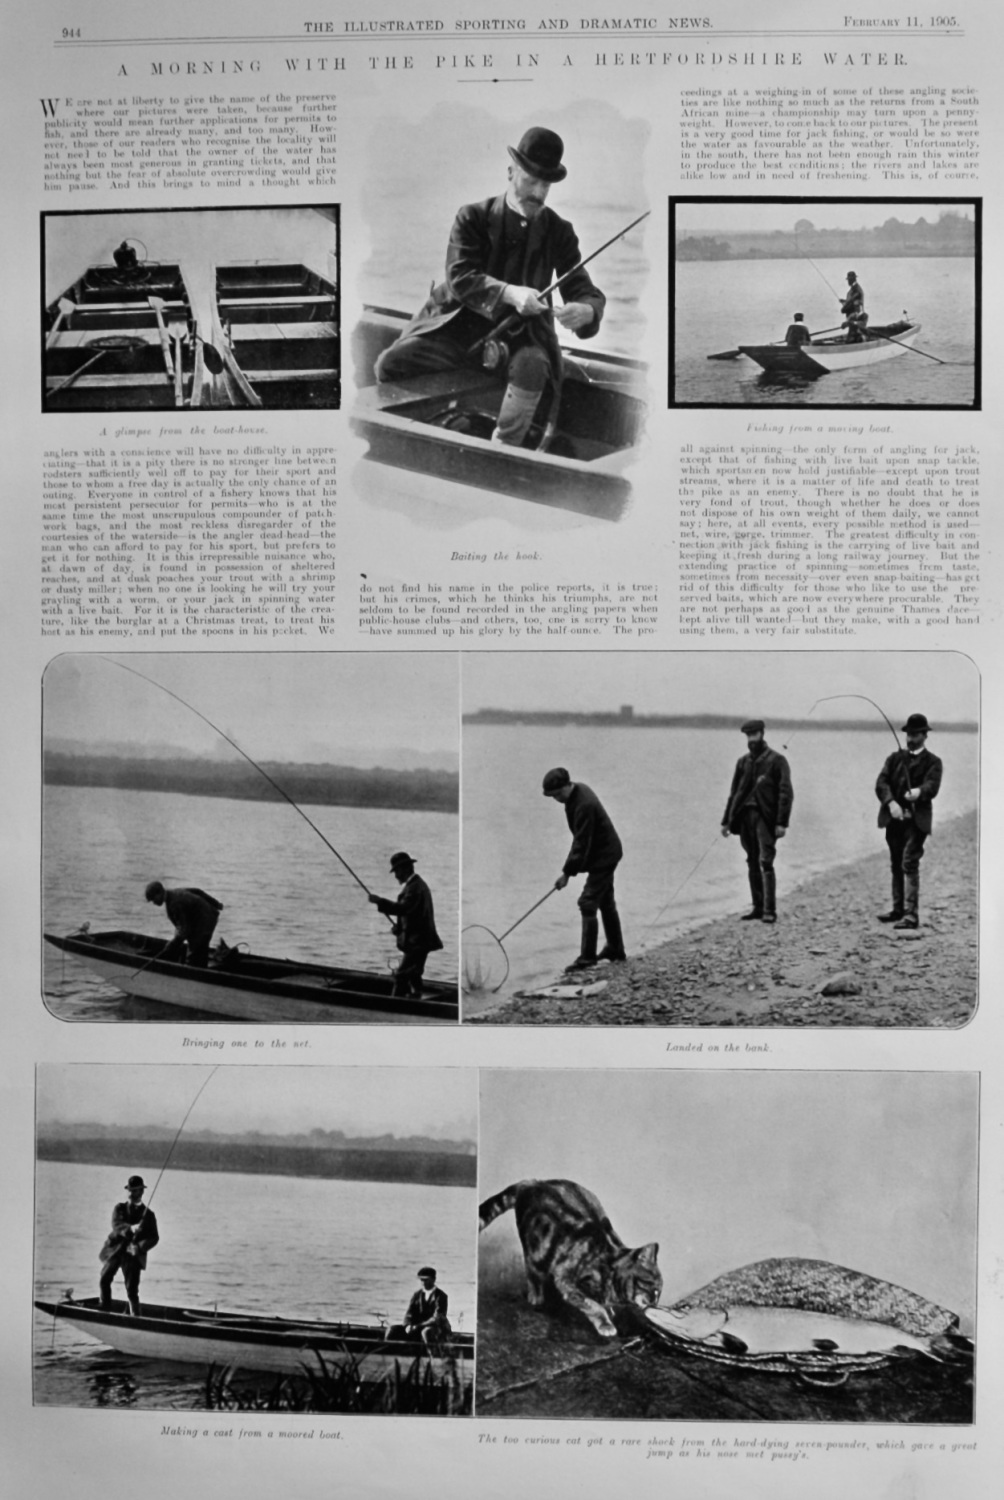 A Morning with the Pike in a Hertfordshire Water.  1905.